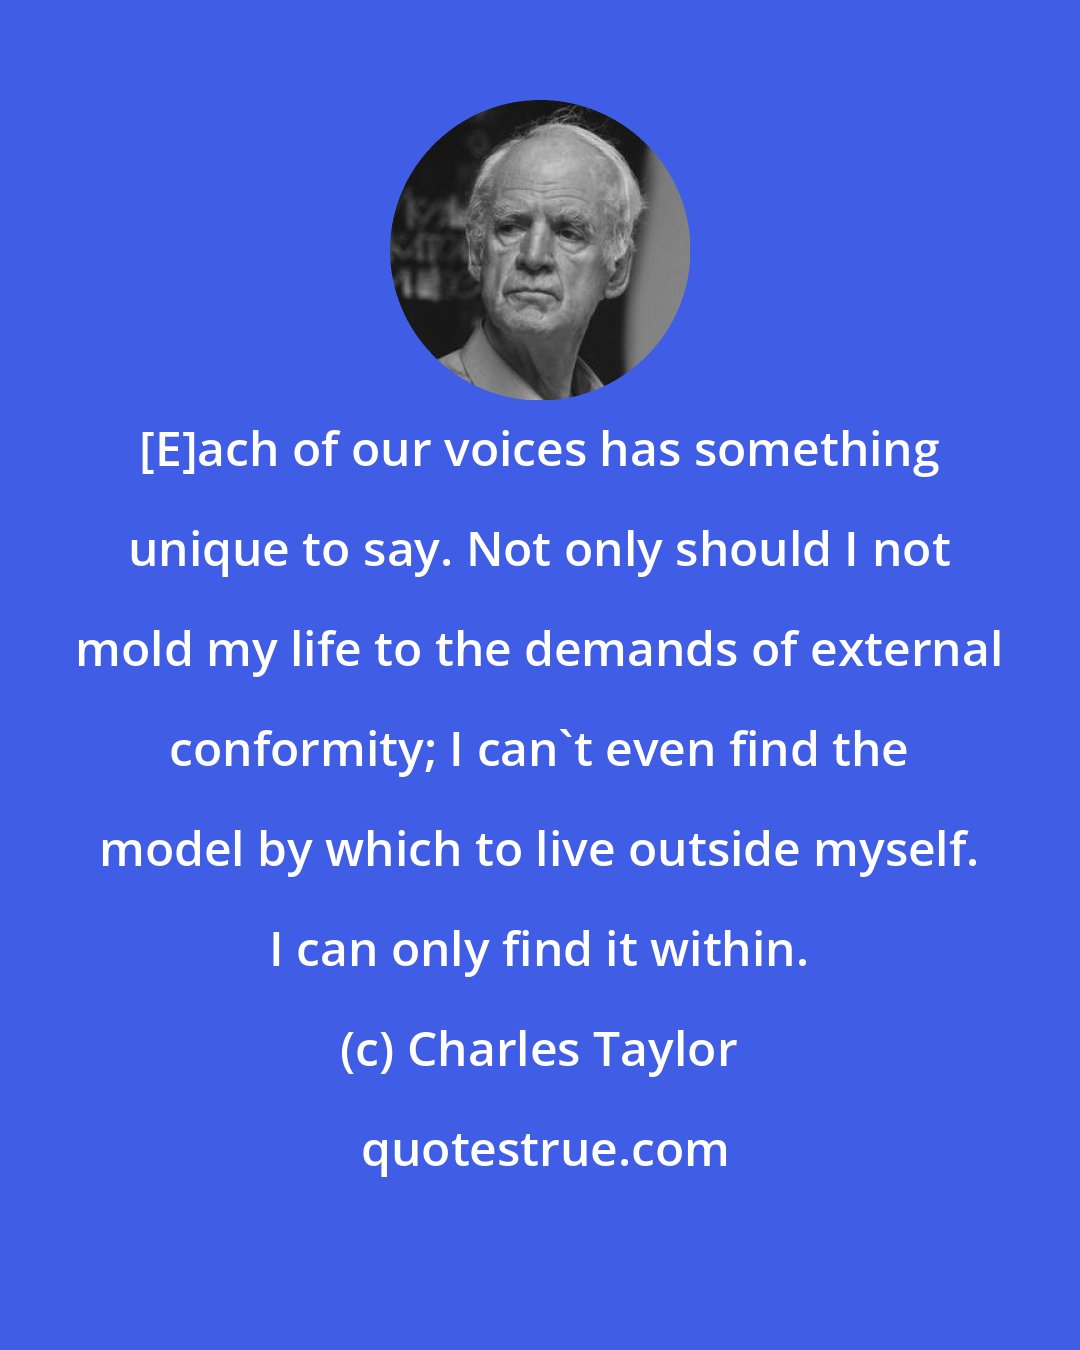 Charles Taylor: [E]ach of our voices has something unique to say. Not only should I not mold my life to the demands of external conformity; I can't even find the model by which to live outside myself. I can only find it within.